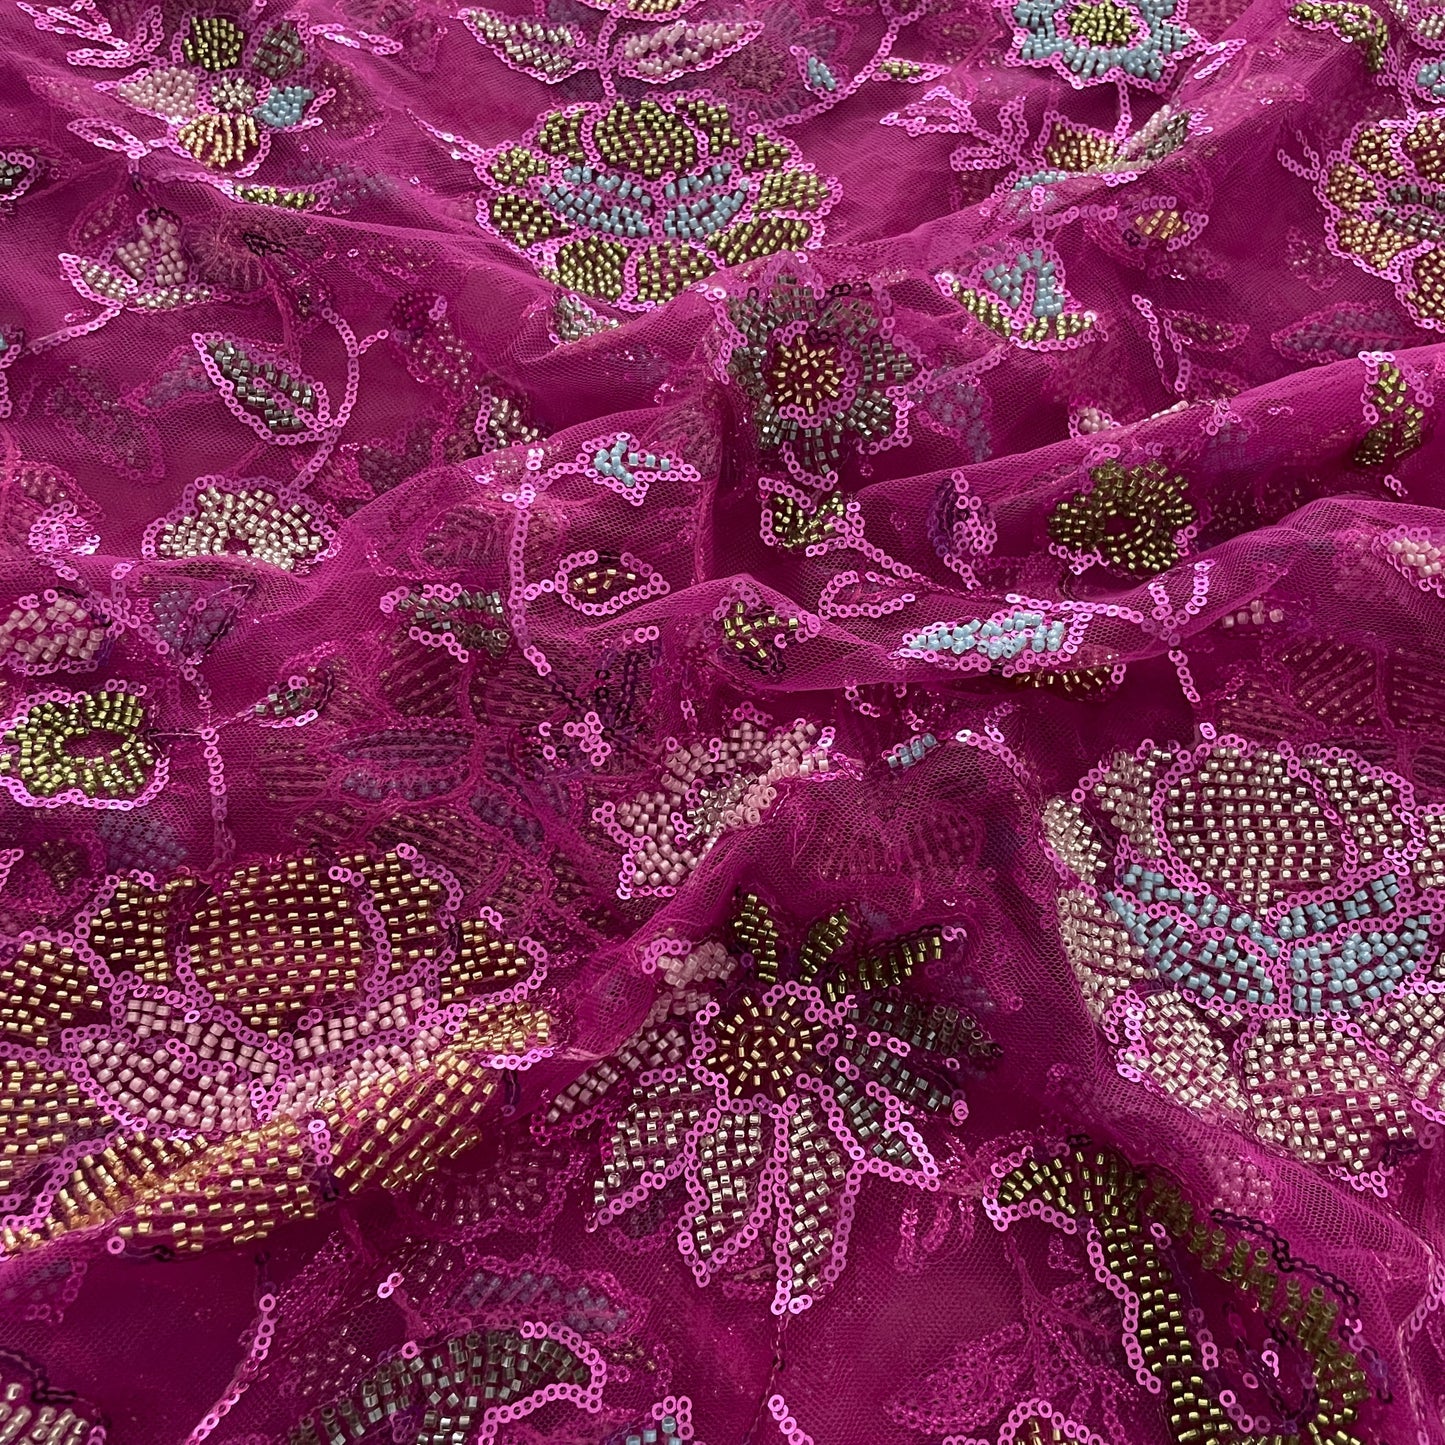 Buy Premium Pink Floral CutDana Sequins Embroidery Net Fabric Online at ...